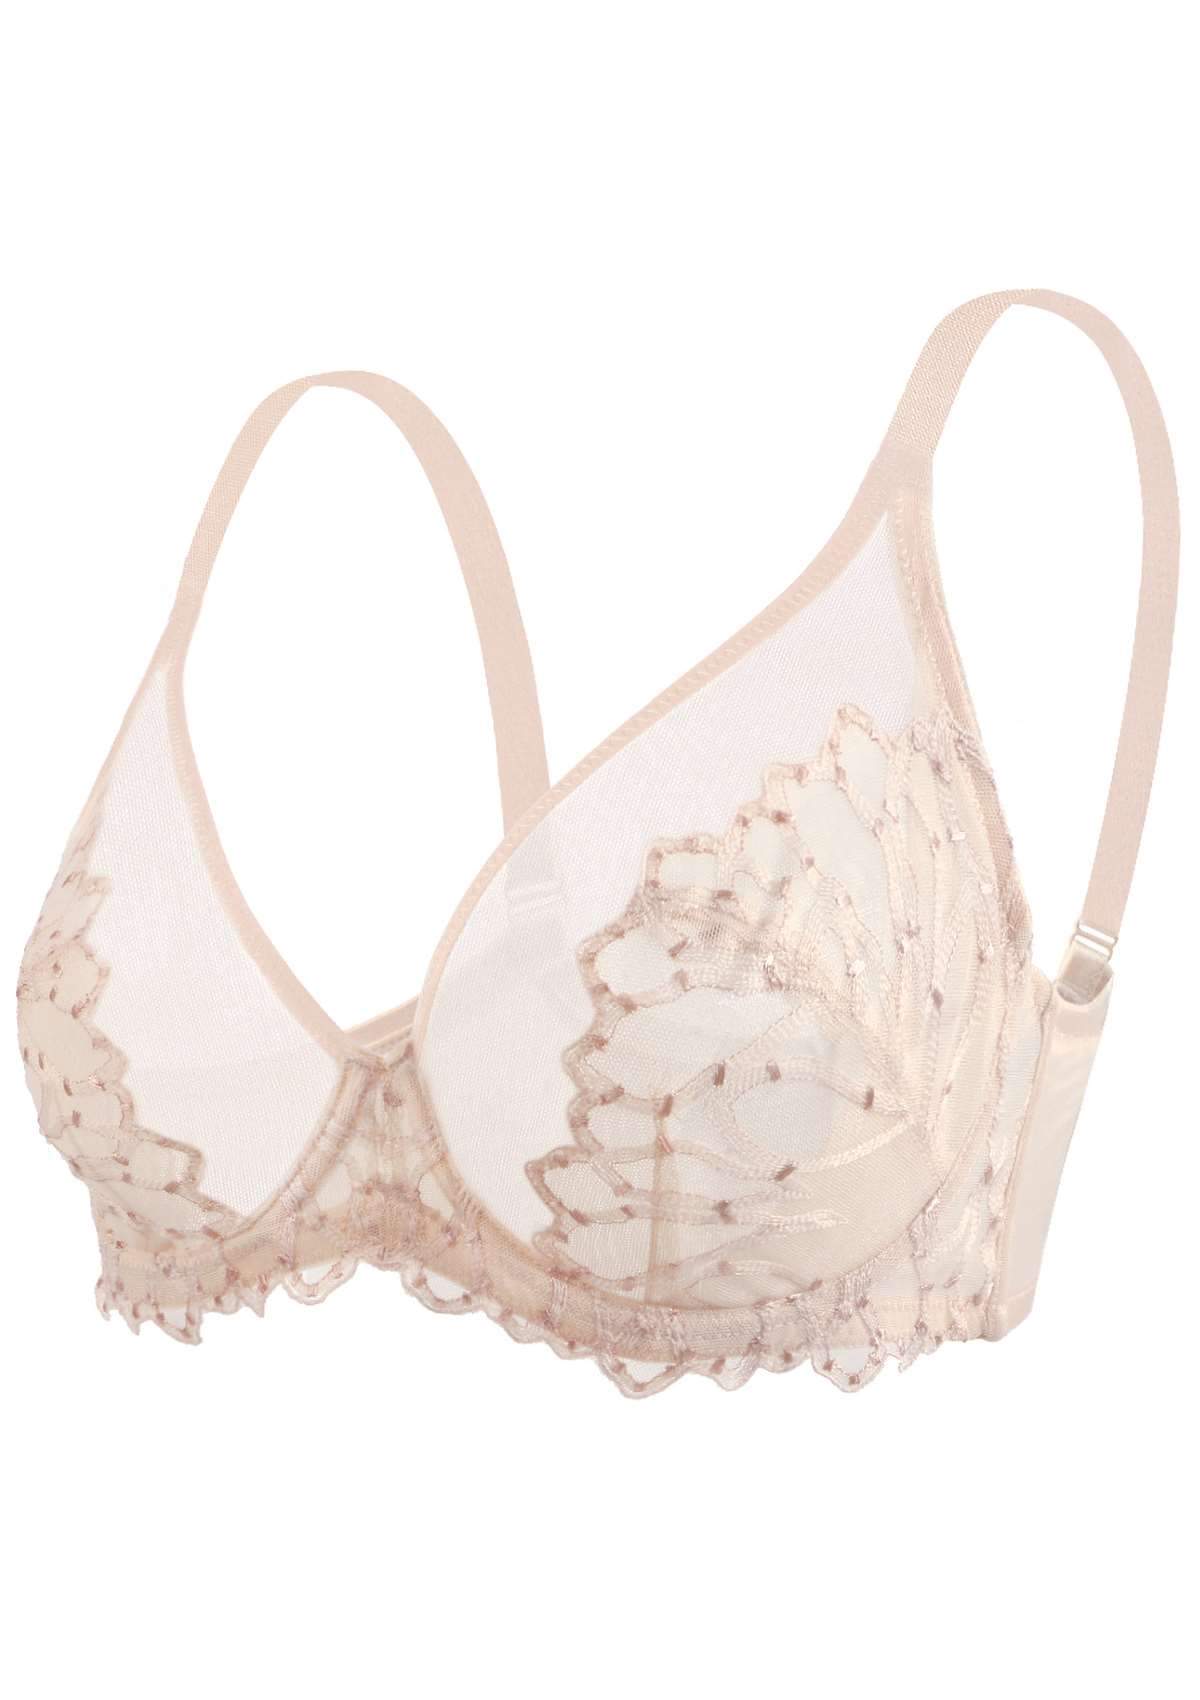 HSIA Chrysanthemum Plus Size Lace Bra: Back Support Bra For Posture - Light Pink / 34 / D